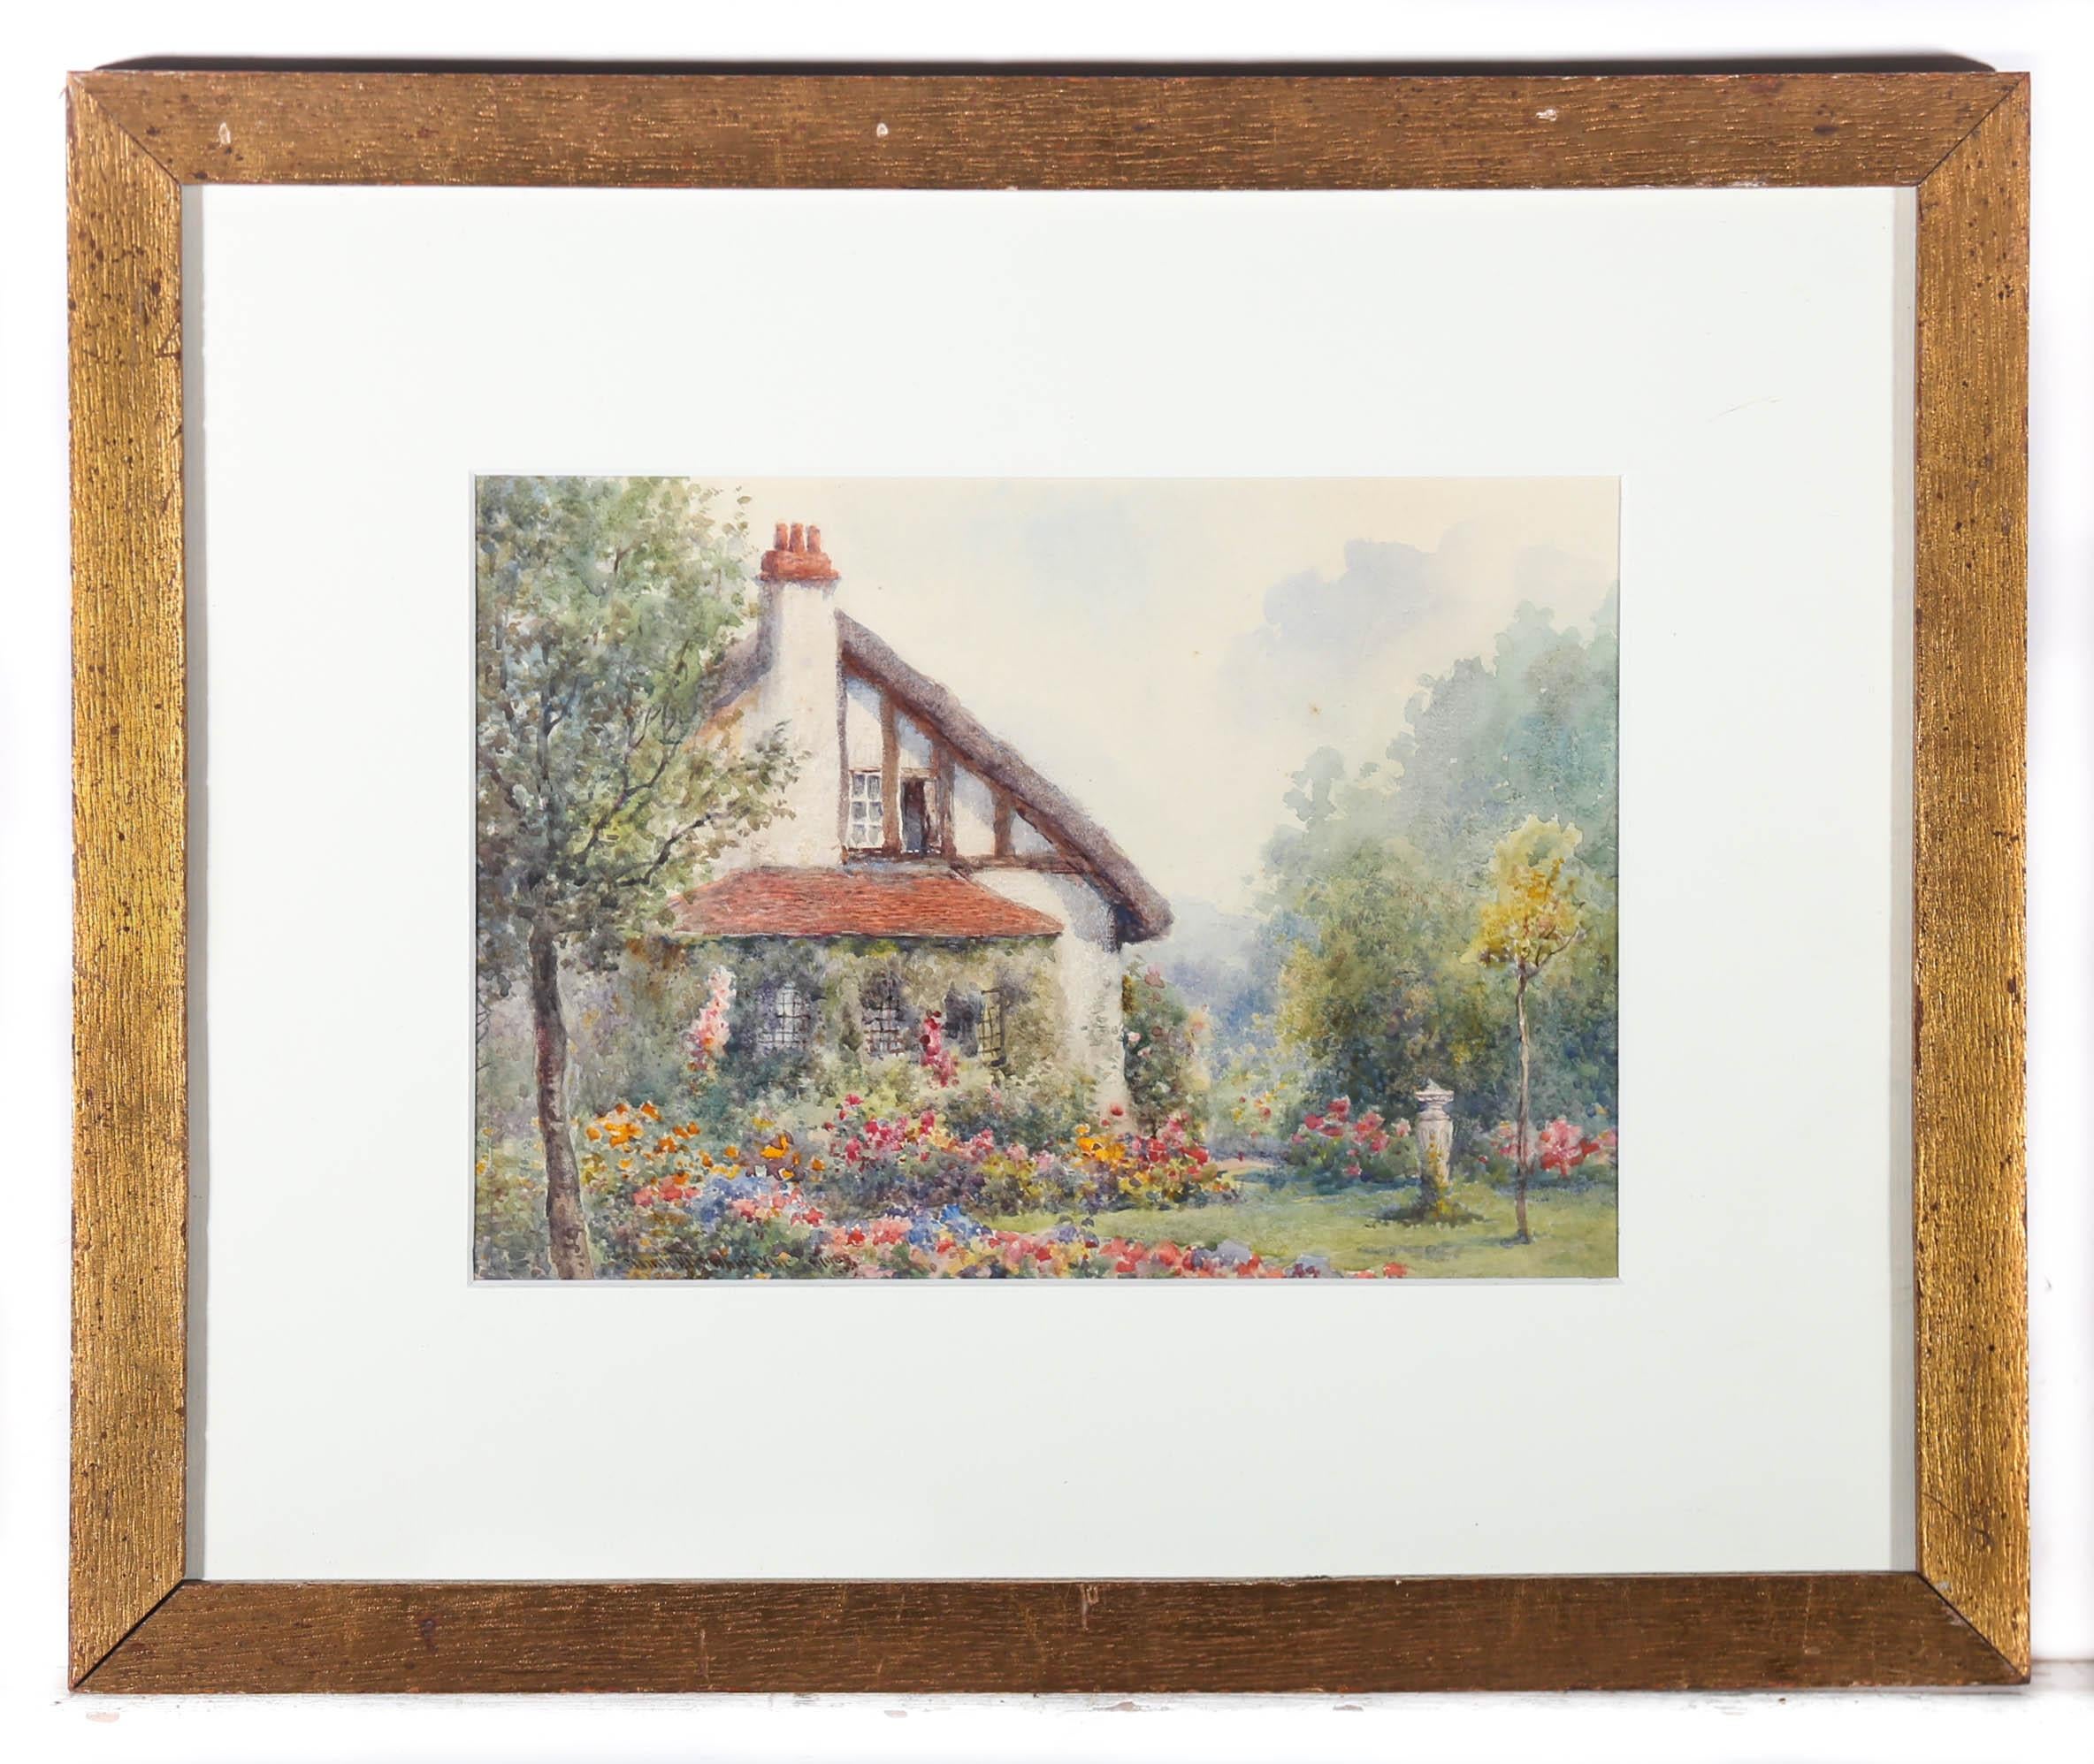 A delightful cottage garden scene by the well listed artist Claude H. Rowbotham (1846-1949). Instantly grabbing the viewers attention is a wonderful display of perennial borders in full colour. Signed and dated by the artist to the lower left. The